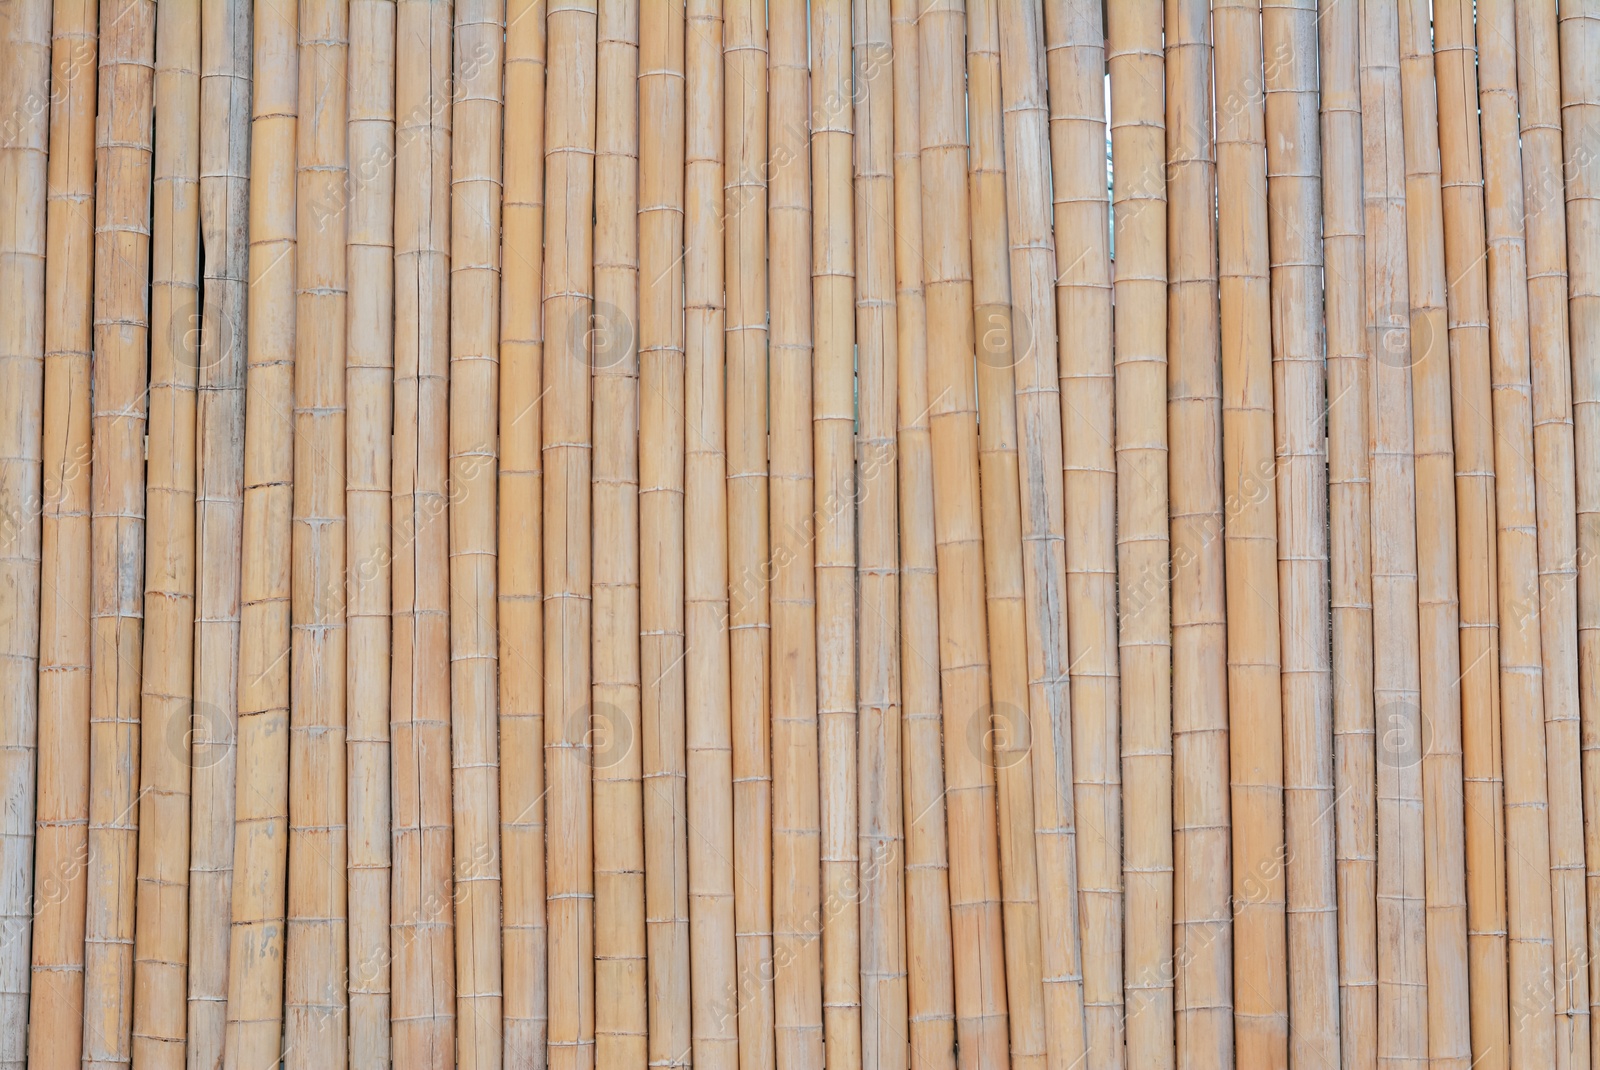 Photo of Fence made with dry bamboo sticks as background, closeup